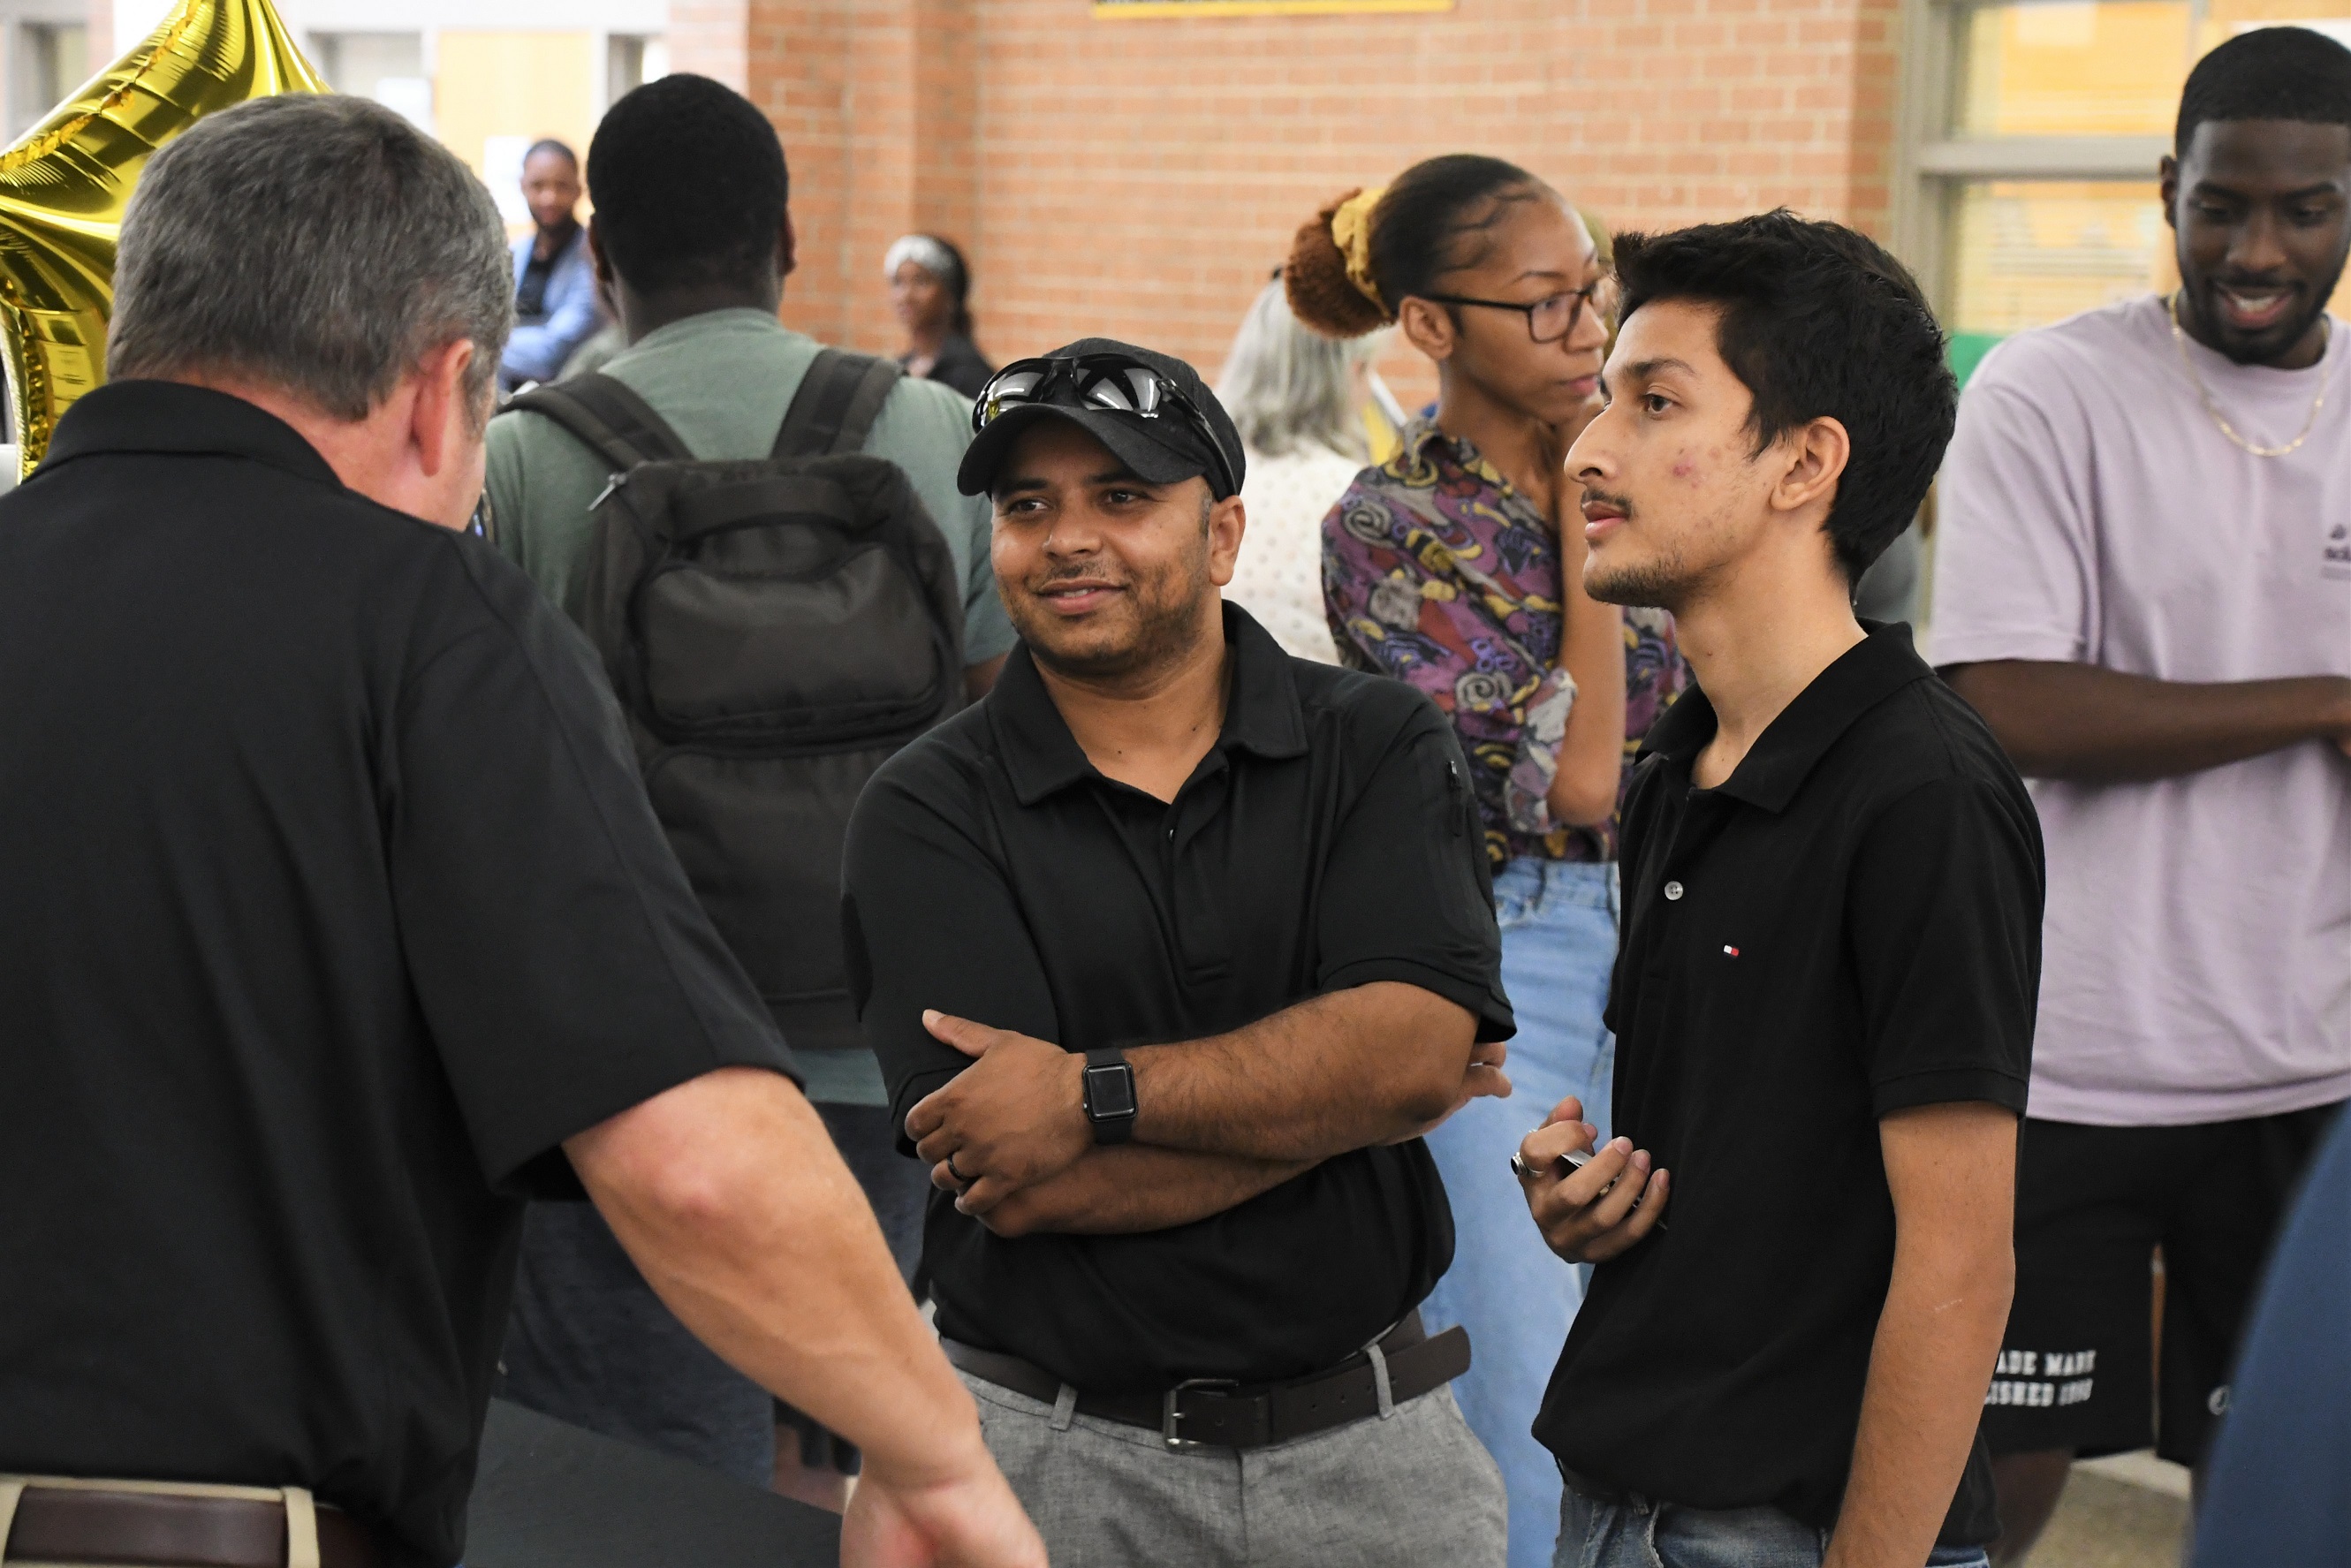 Two attendees talk with an employer at the Skilled Trades and Technology Expo.